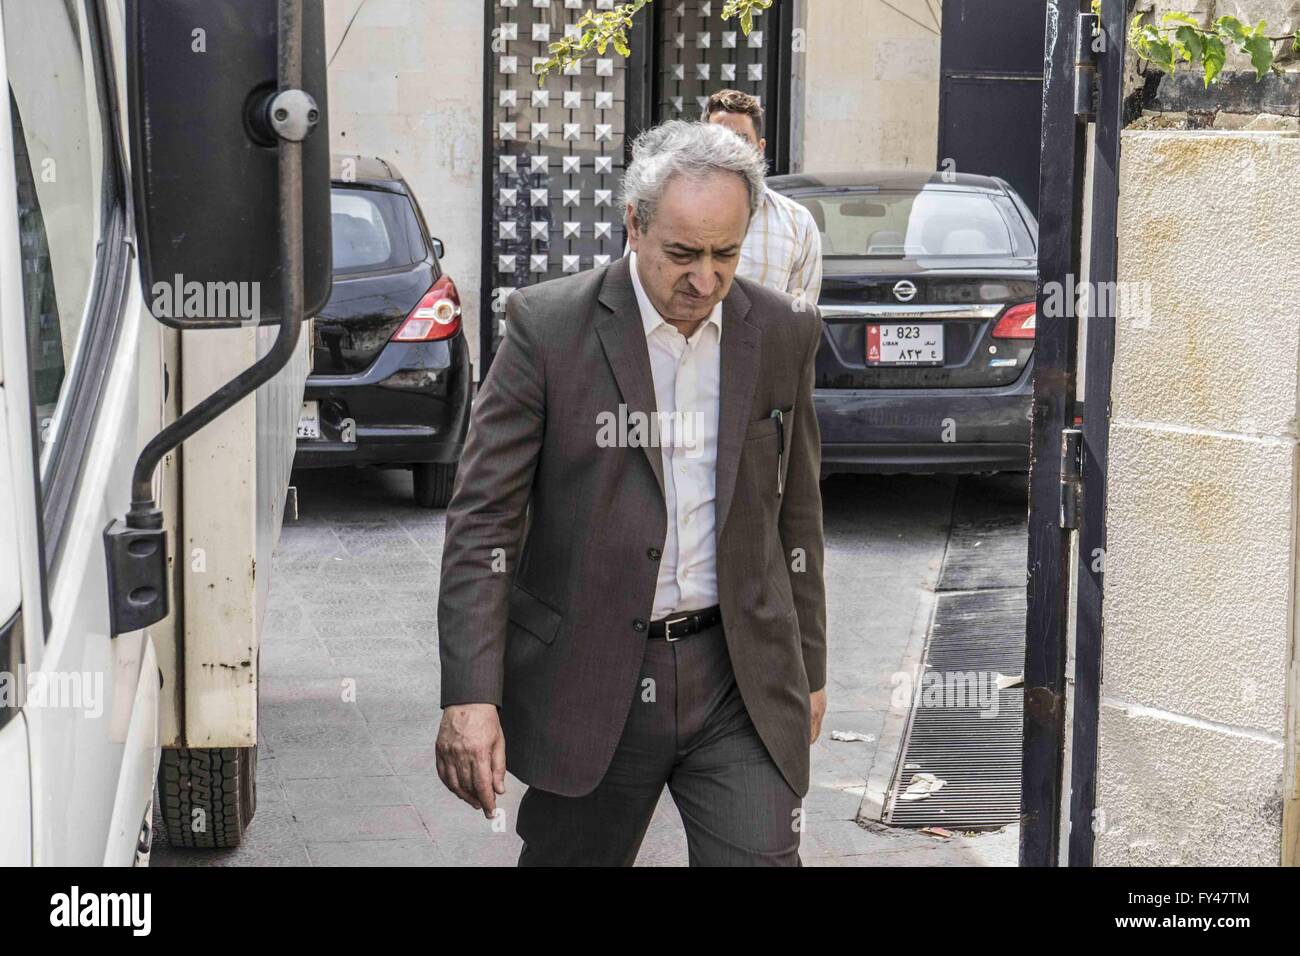 Beirut, Lebanon. 21st Apr, 2016. April 21, 2016 - Baabda Court House, Beirut, Lebanon: Ali Zeid al-Amin and his lawyer Hussein Berjawi walking out of Baabda Palace of Justice/courthouse where they are continuing to press charges against four suspects. The four include British-Australian Adam Whittington, who heads the Britain-based agency Child Abduction Recovery International, and is alleged to have masterminded the botched attempt to snatch the two children in Beirut along with another Briton, Greg Michael. Credit:  ZUMA Press, Inc./Alamy Live News Stock Photo